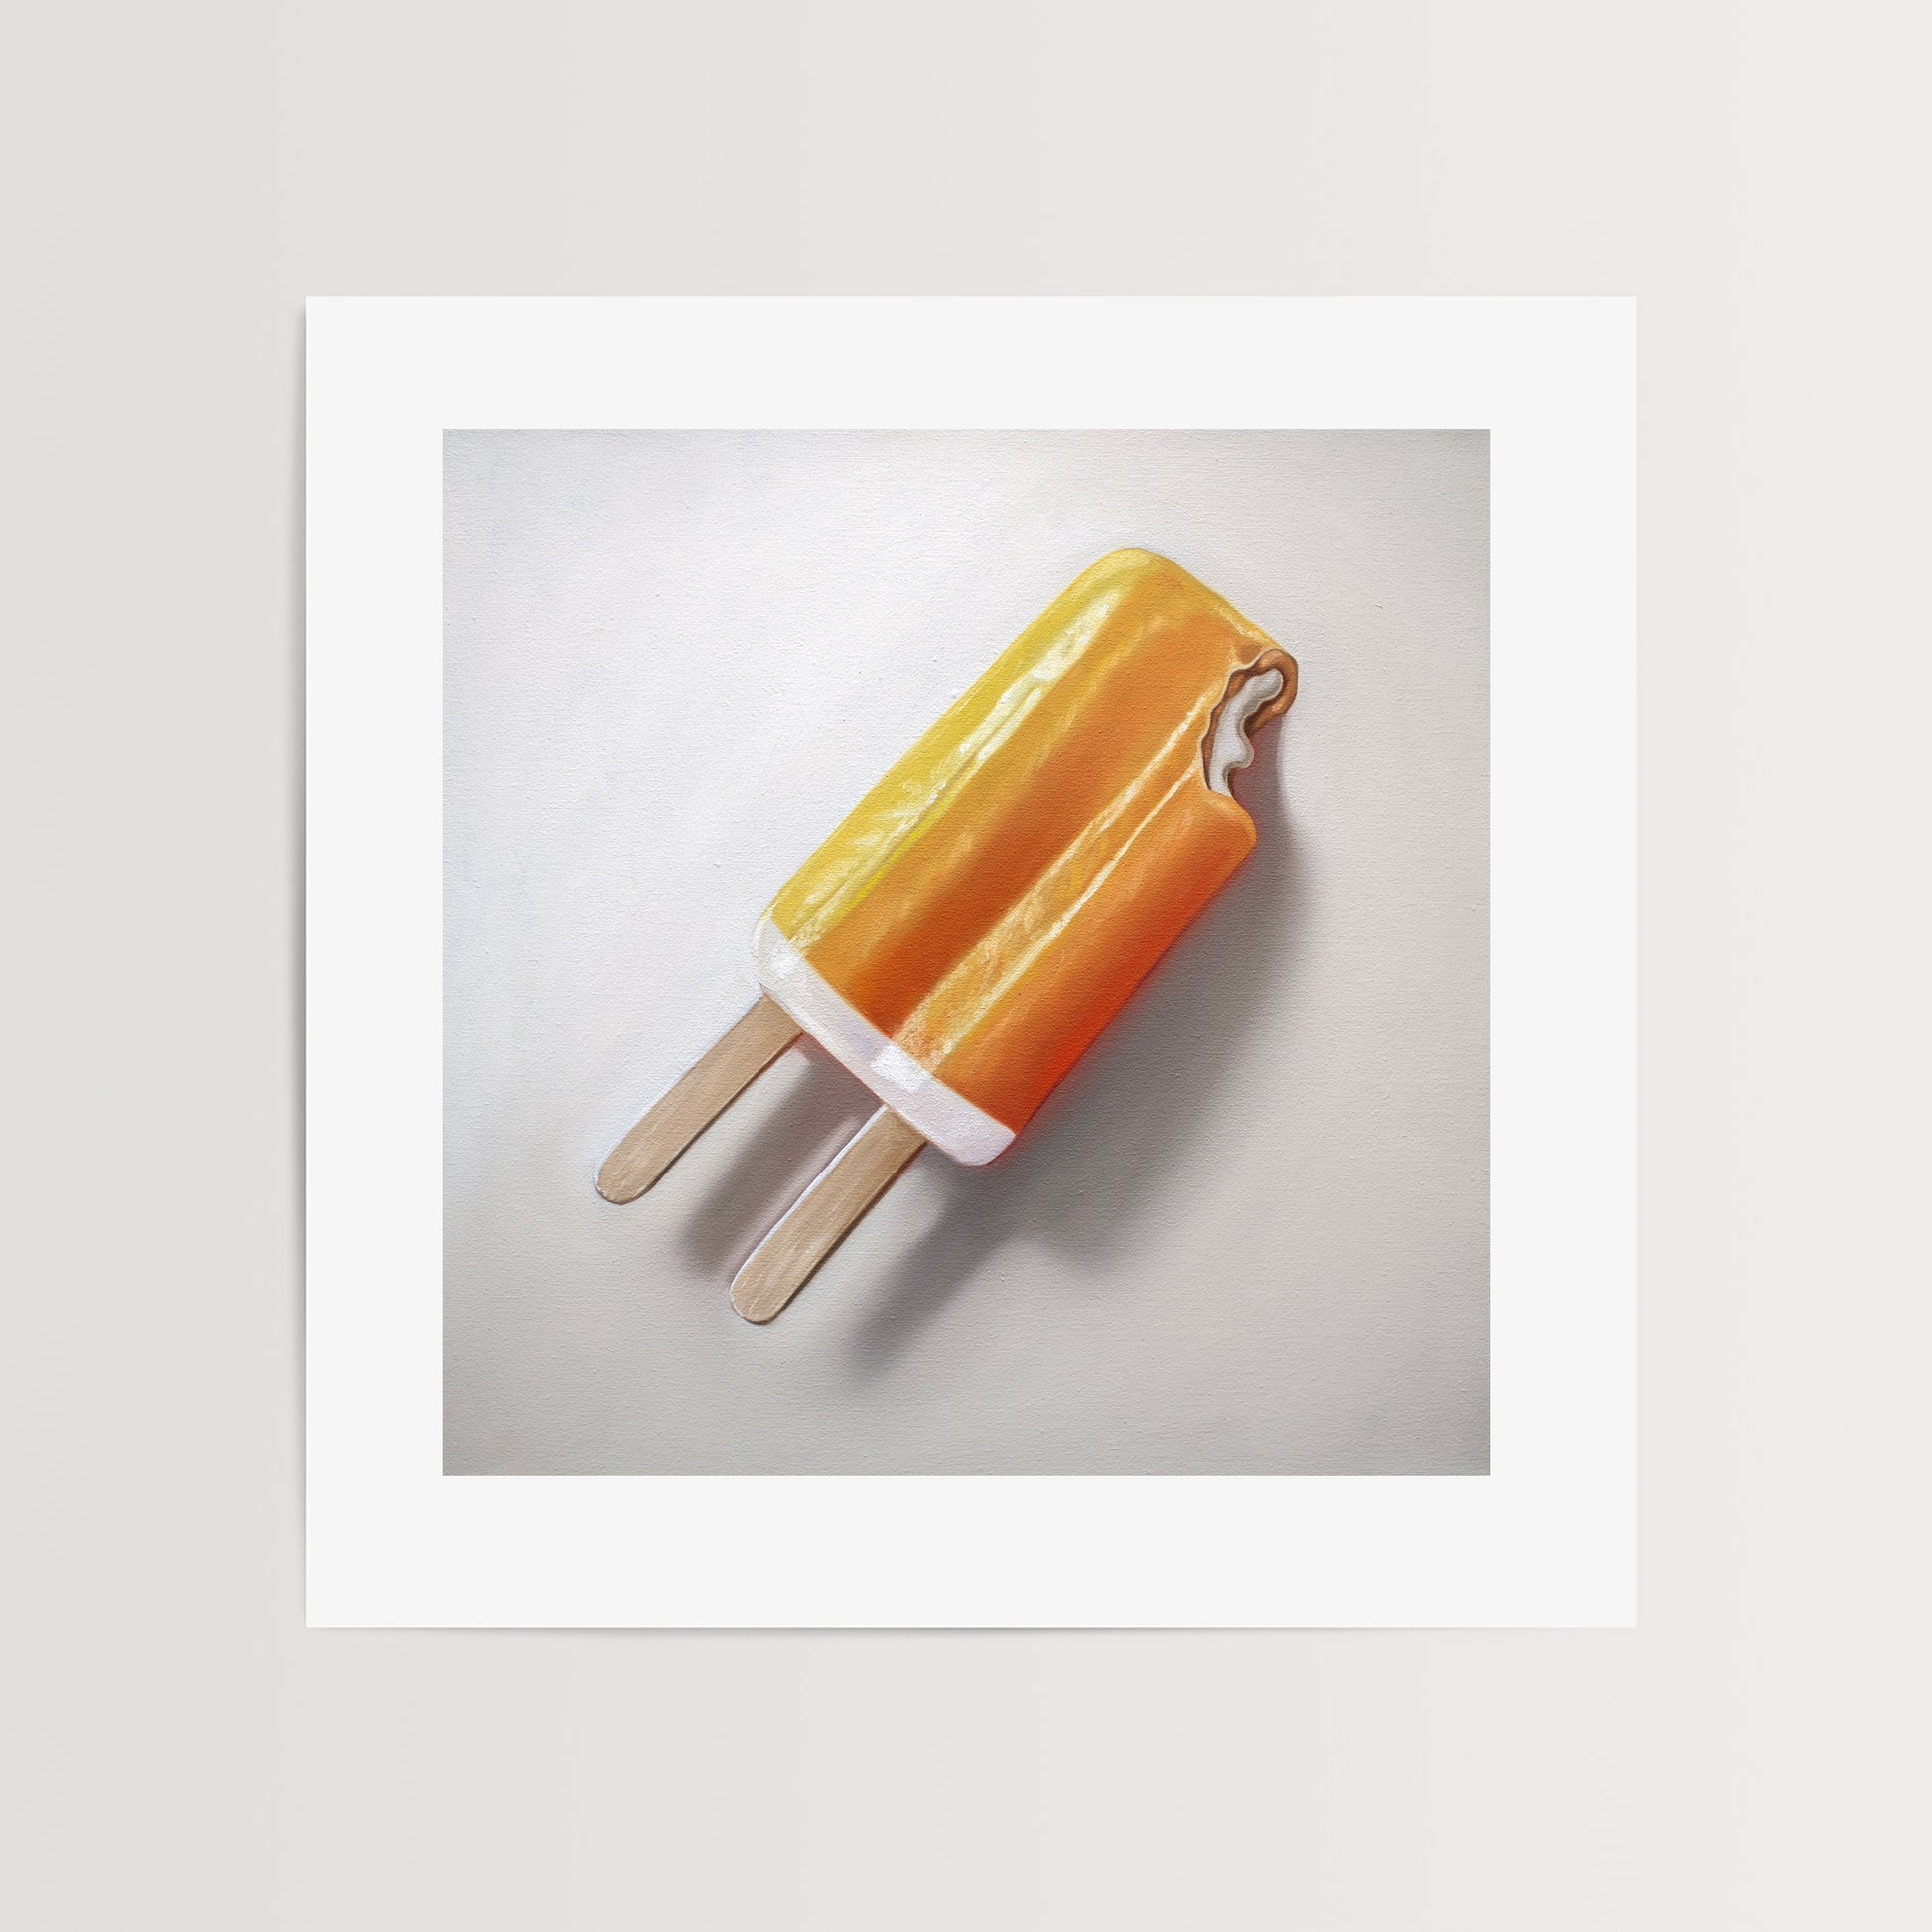 This artwork features a summertime favorite… the vanilla ice cream and orange popsicle combo otherwise known as the delicious dreamsicle.